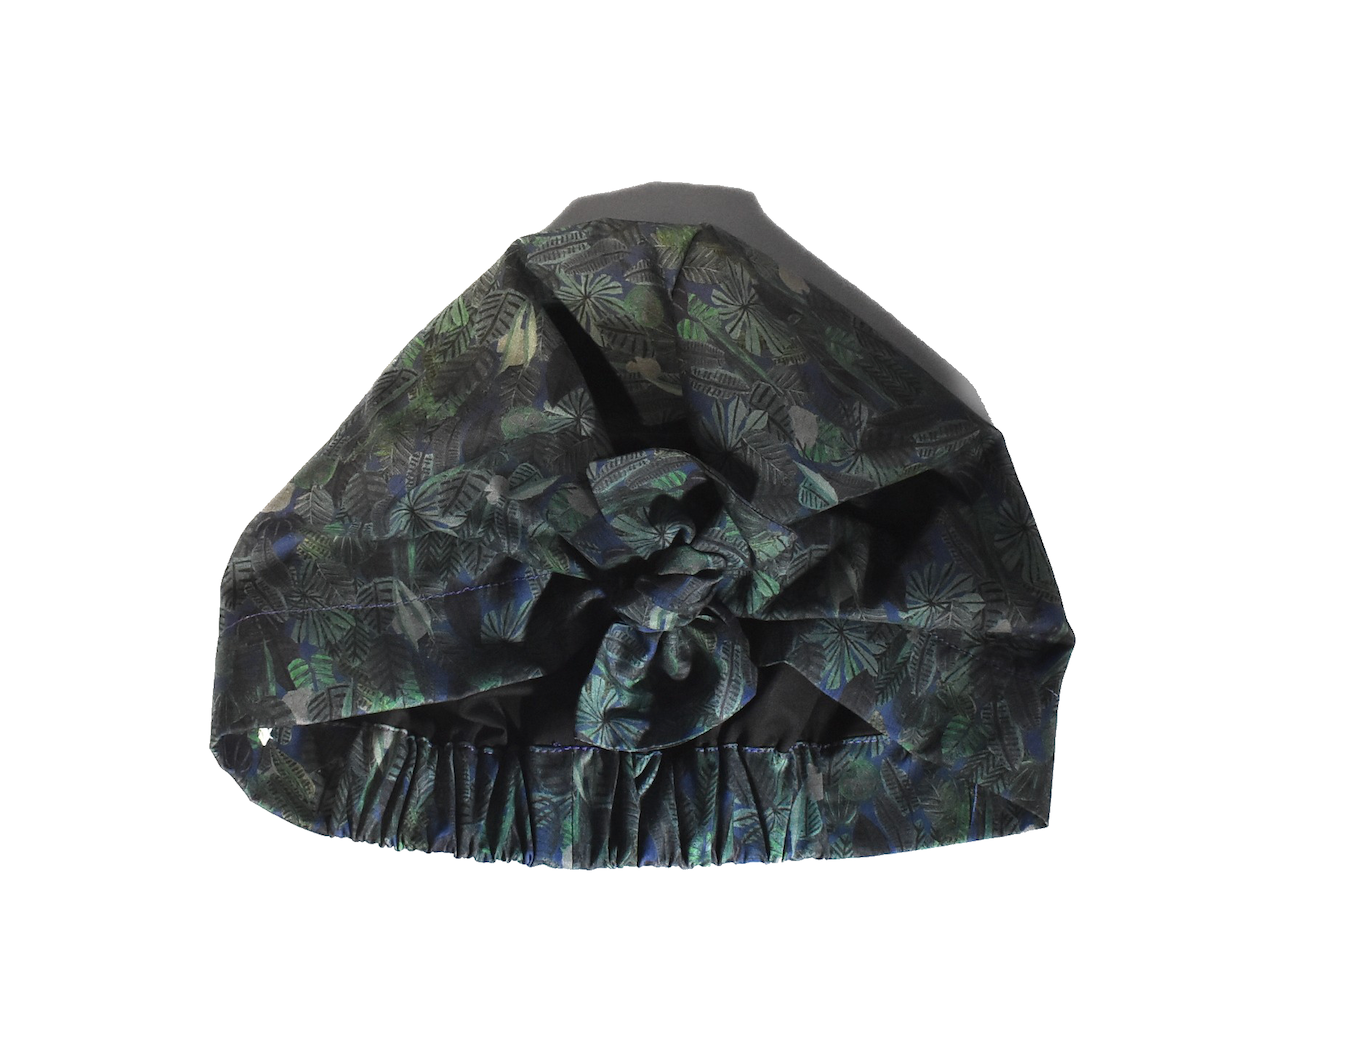 Little Land Girl Baby Hat - Liberty of London Chaparrel - Navy and Green Fern Print